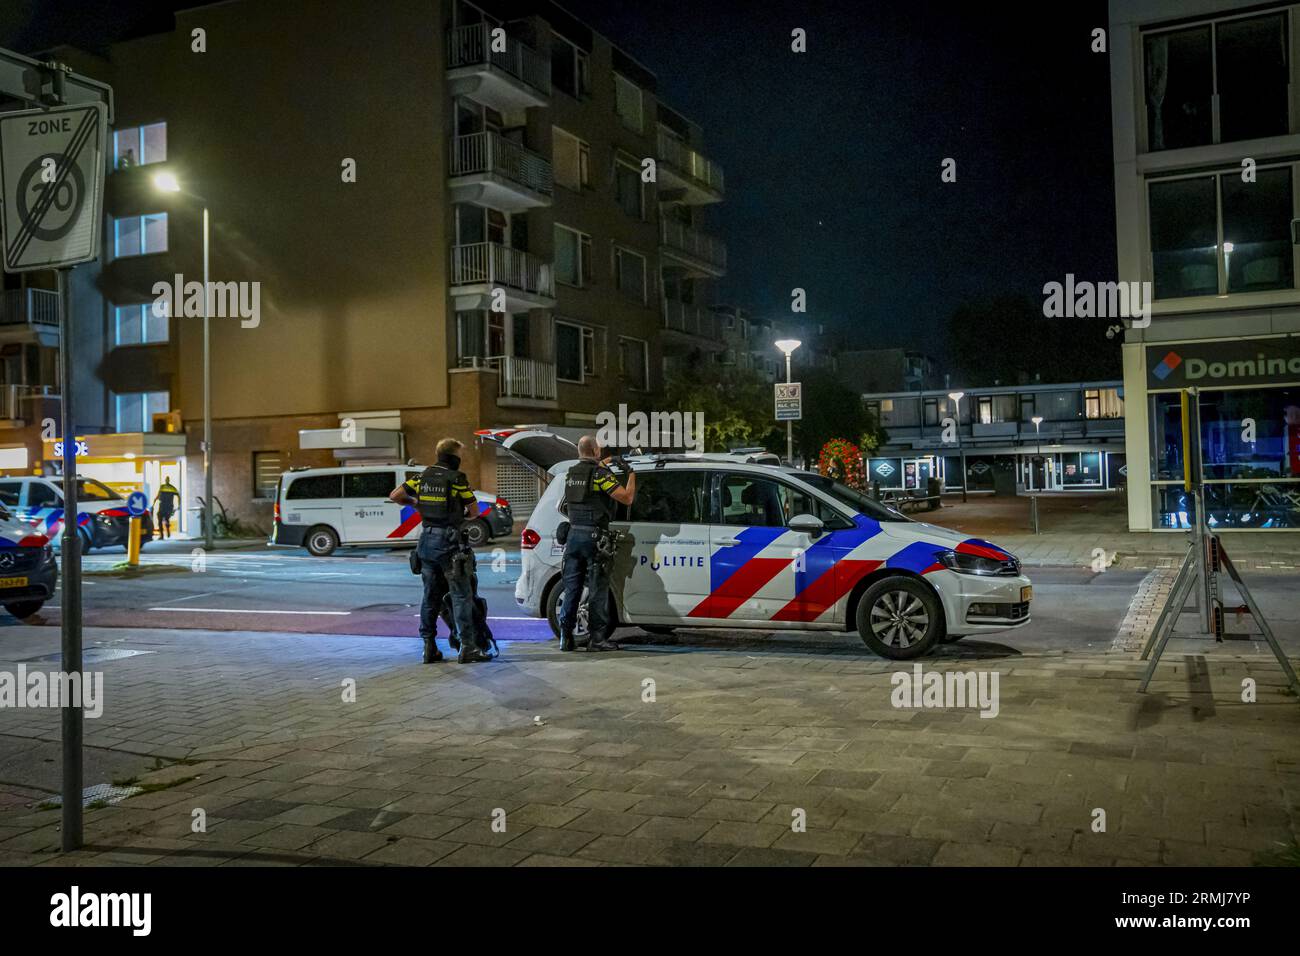 ROTTERDAM - Police officers in Hoogvliet where a man was shot dead. The man was seriously injured, after which he was resuscitated, but the help was to no avail. ANP MEDIA TV netherlands out - belgium out Stock Photo